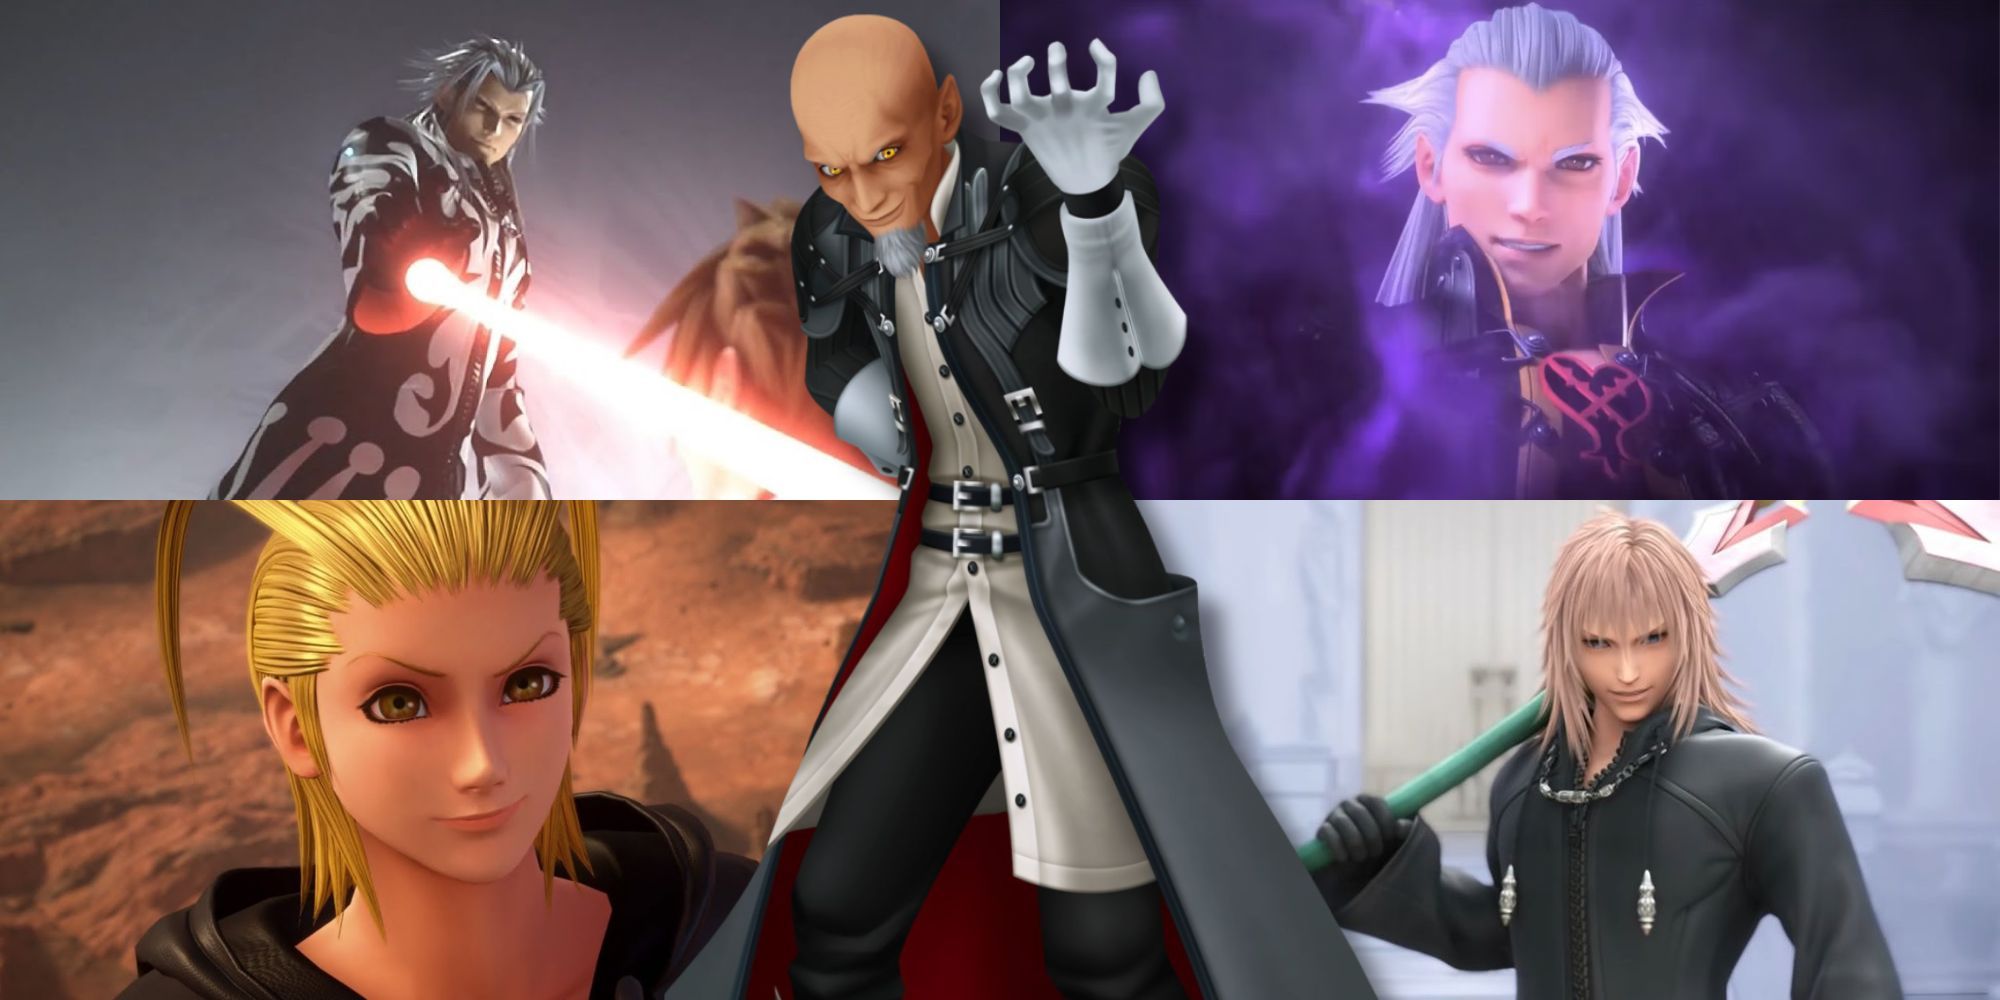 A collage of Master Xehanort, alongside other prominent Kingdom Hearts villains: Xemnas, Ansem, Larxene and Marluxia.